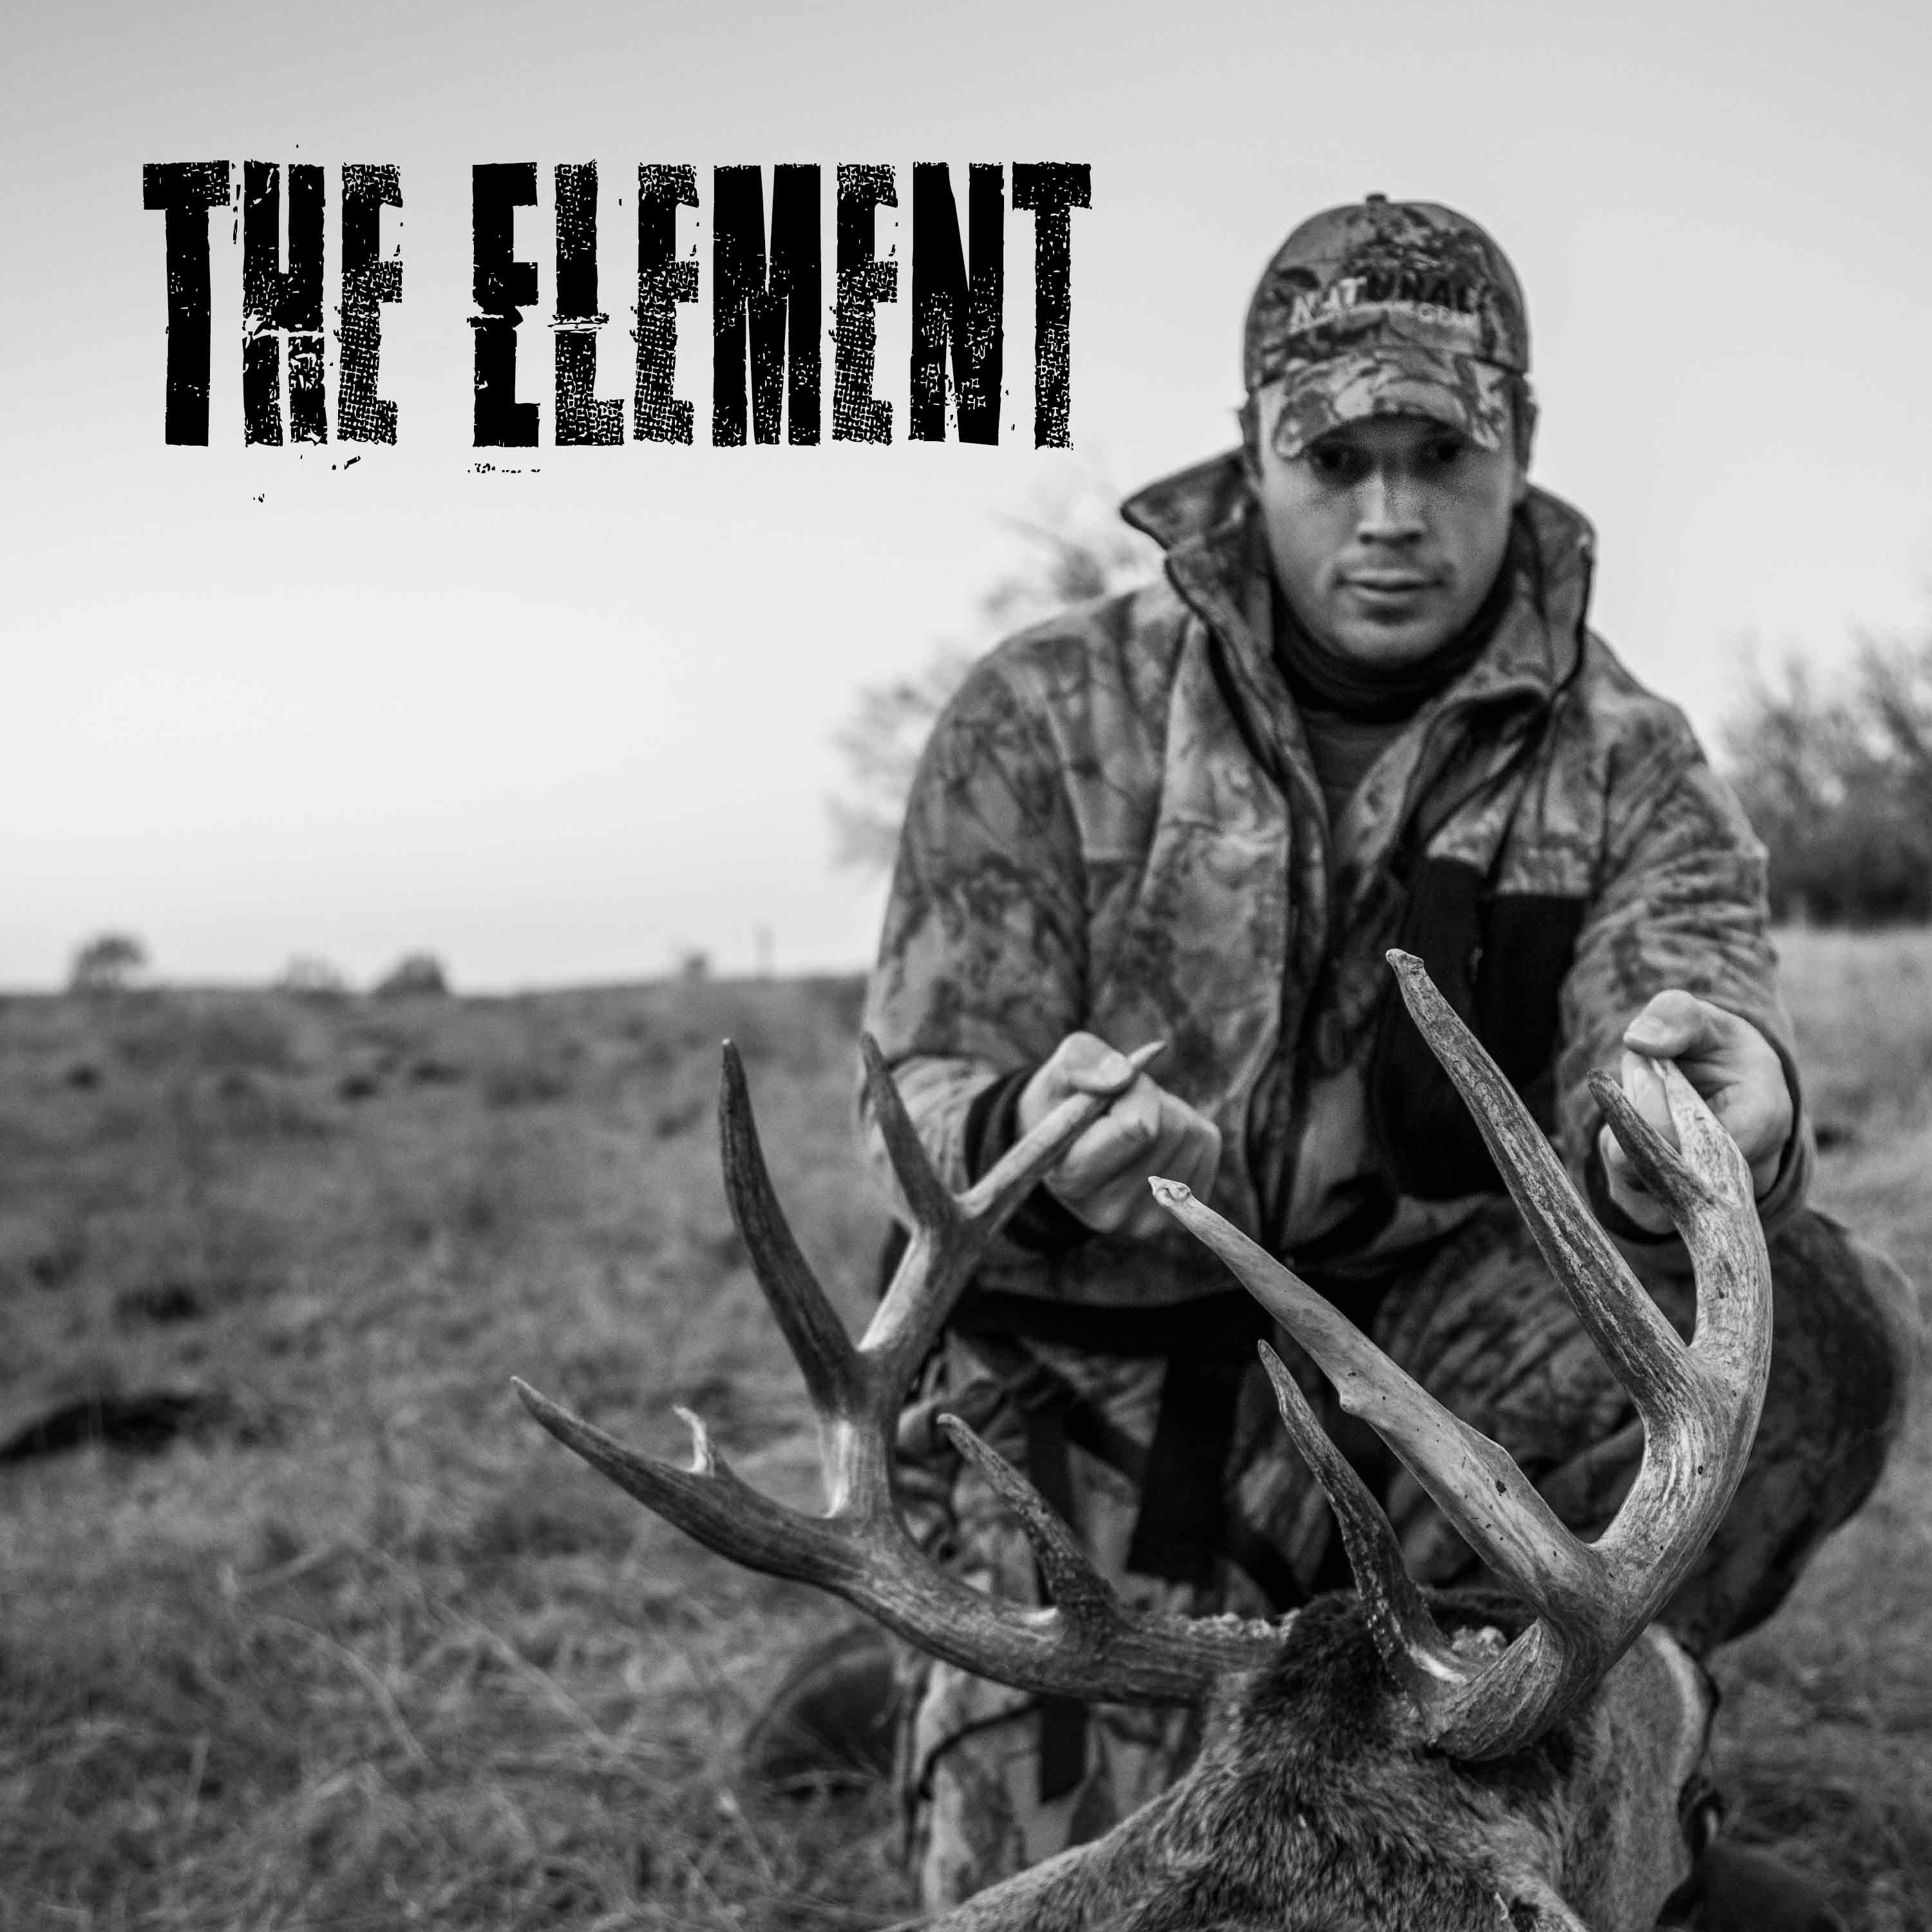 ELK7: ELK HUNTING SERIES (feat. Zack Boughton Of MONTANA WILD and Stone Glacier on Backpack Hunting, Grizz Country, Film Production and Culture, Archery Season Calling, and Wallow Bulls)